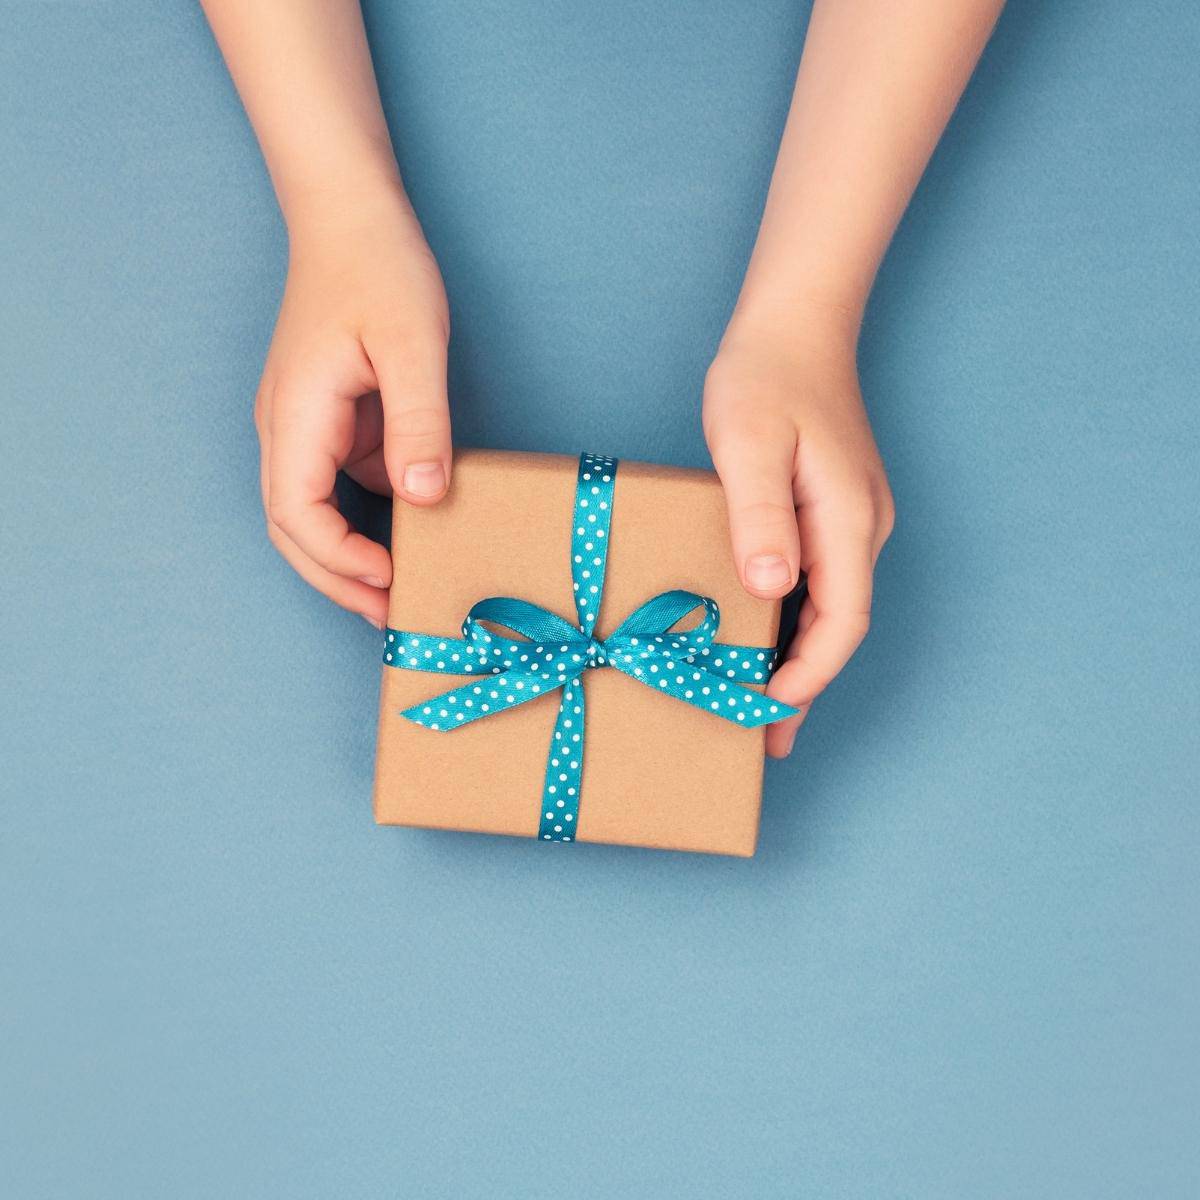 The best funny gifts for weight loss